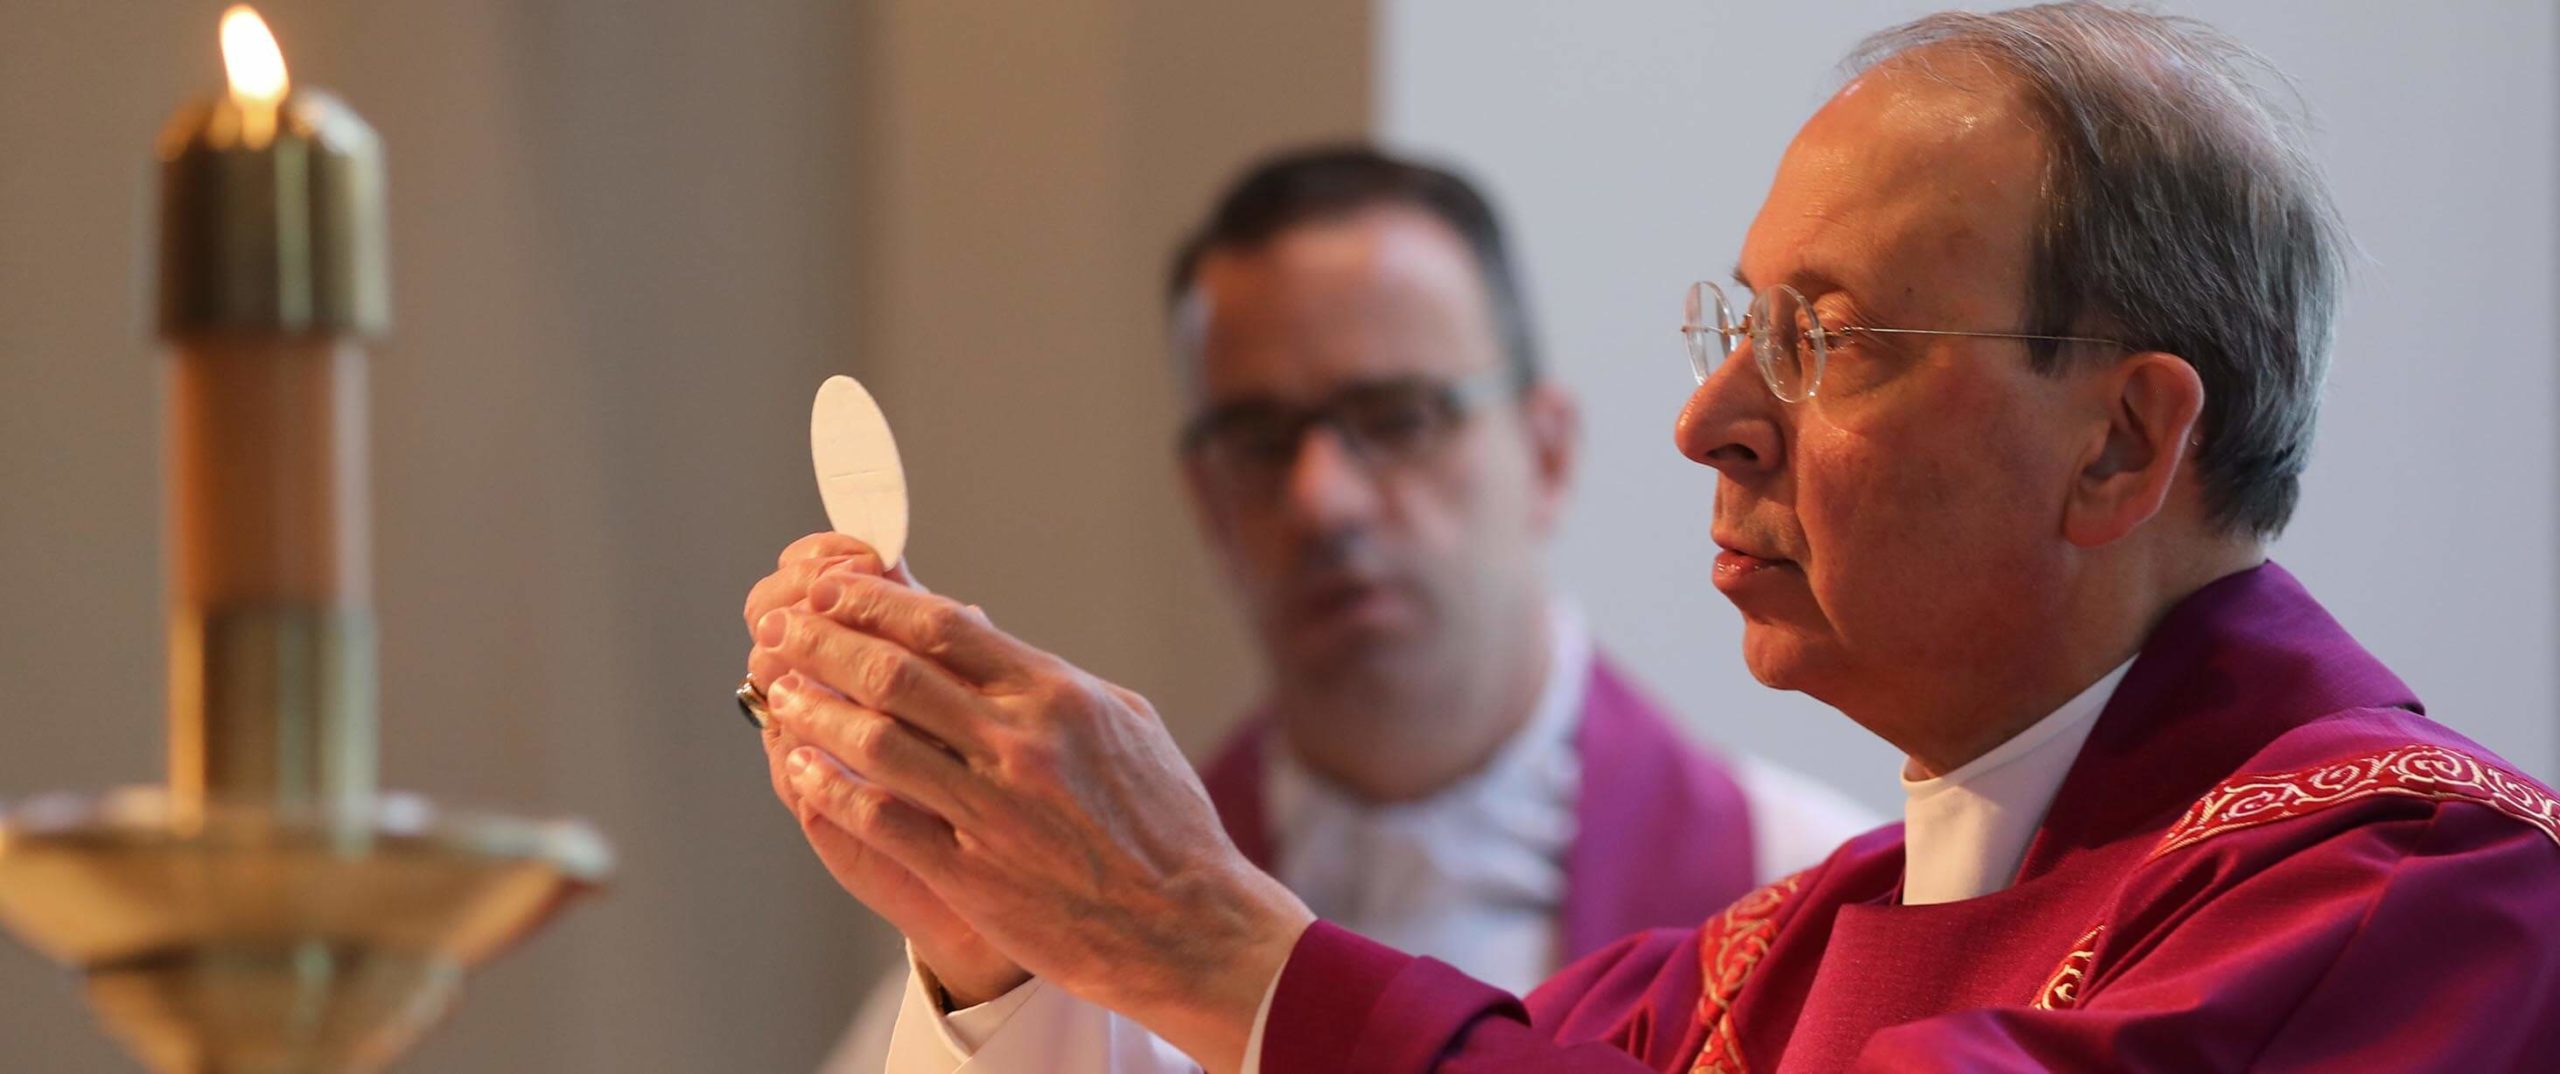 Archbishop Lori: Church has many reasons to get right response to child sexual abuse